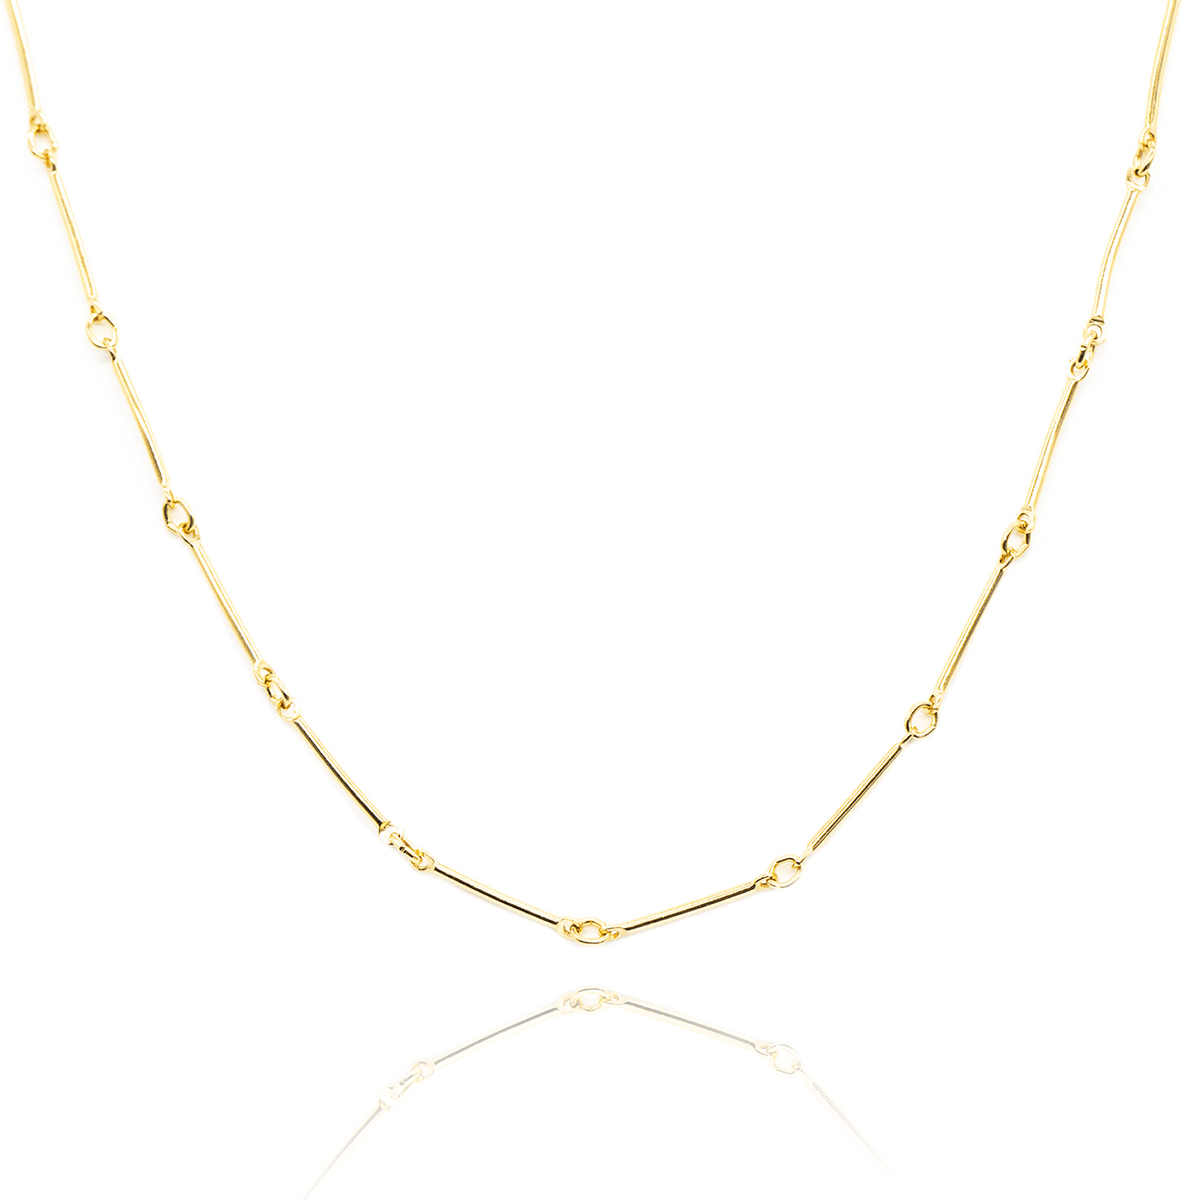 Be Kind gold filled minimal necklace on white background